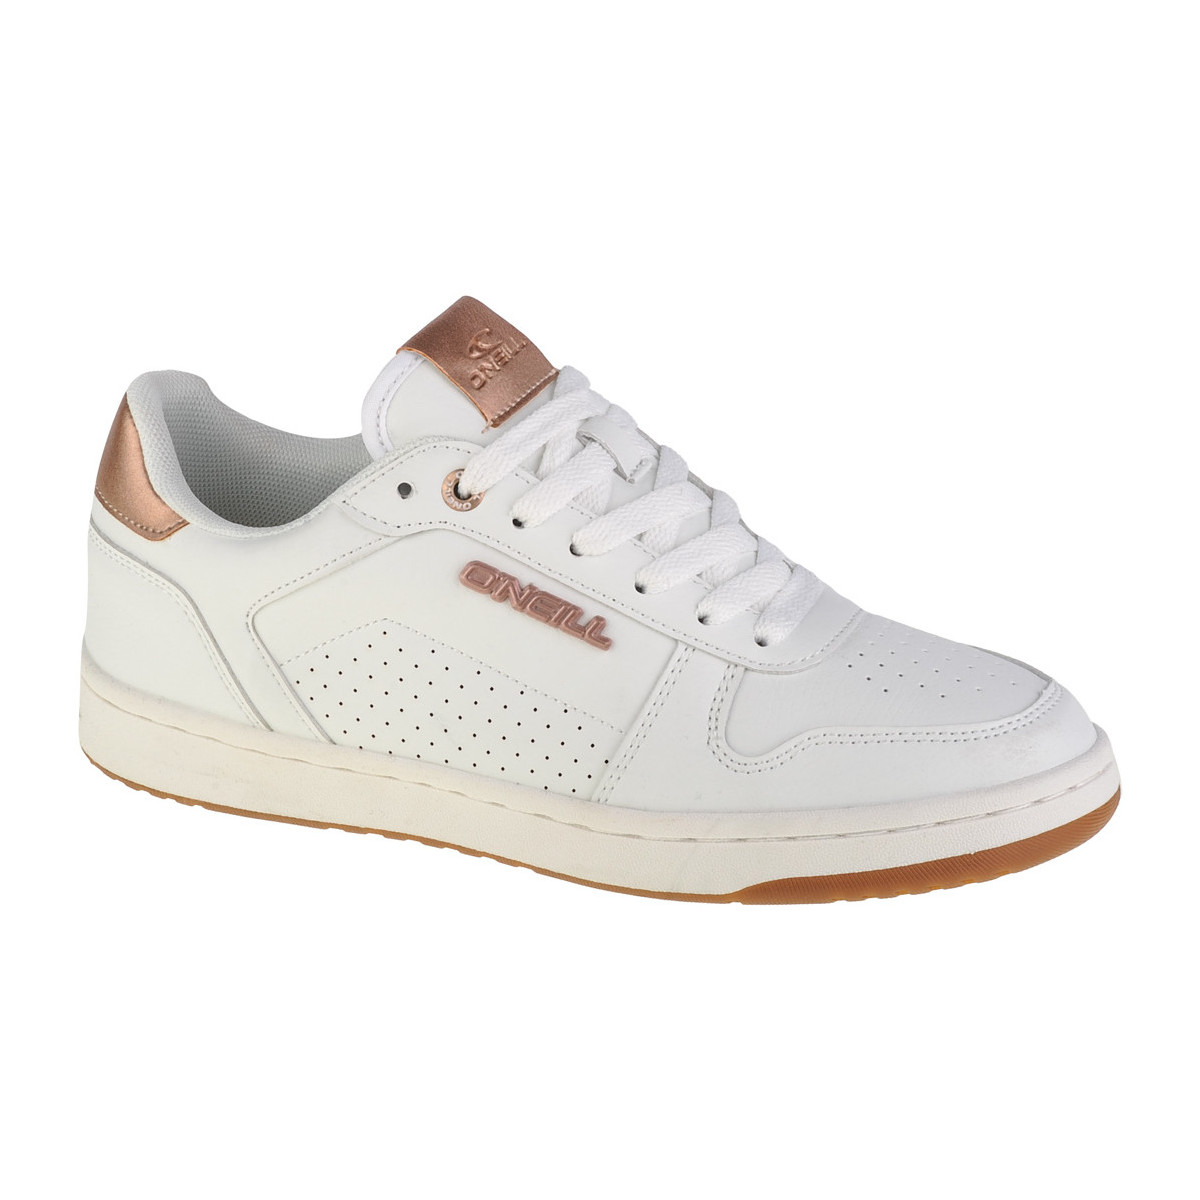 Chaussures Femme Baskets basses O'neill Byron Wmn Low Blanc